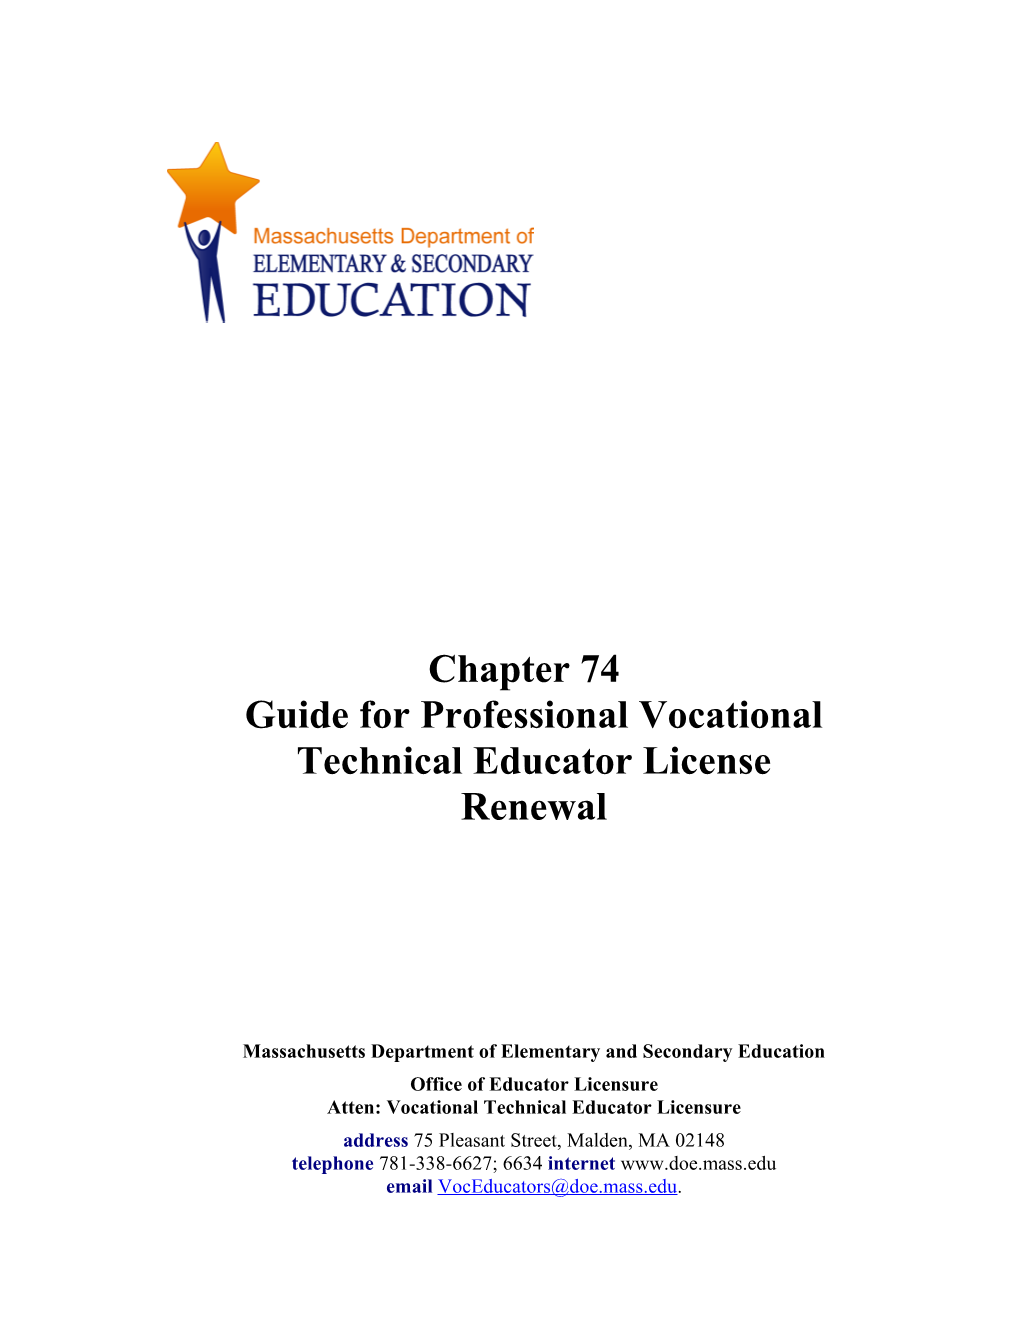 Ch. 74 Guide for Professional Voc Tech Ed License Renewal